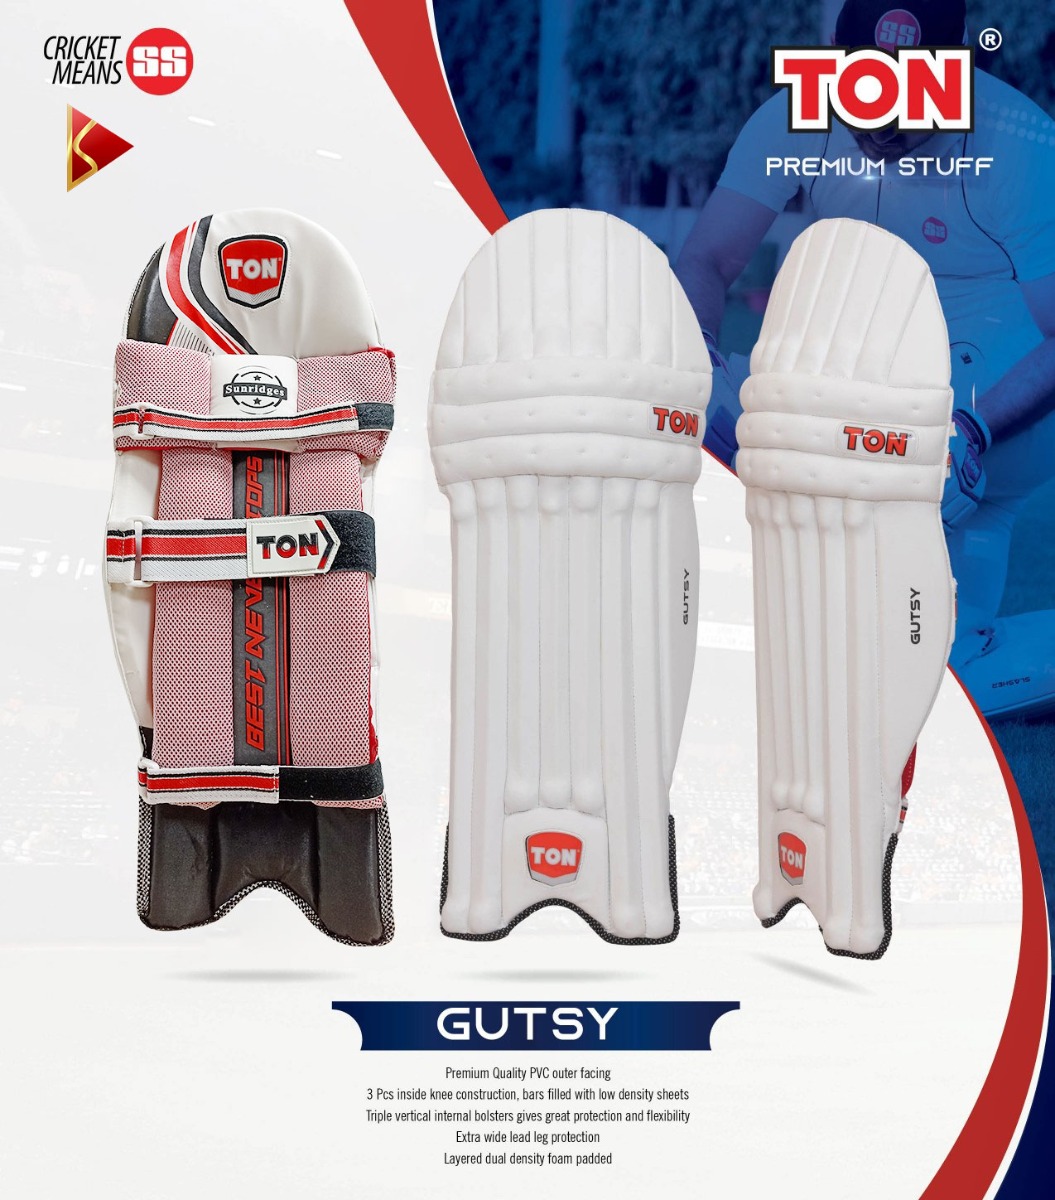 SS Ton Gutsy Batting Pads Features